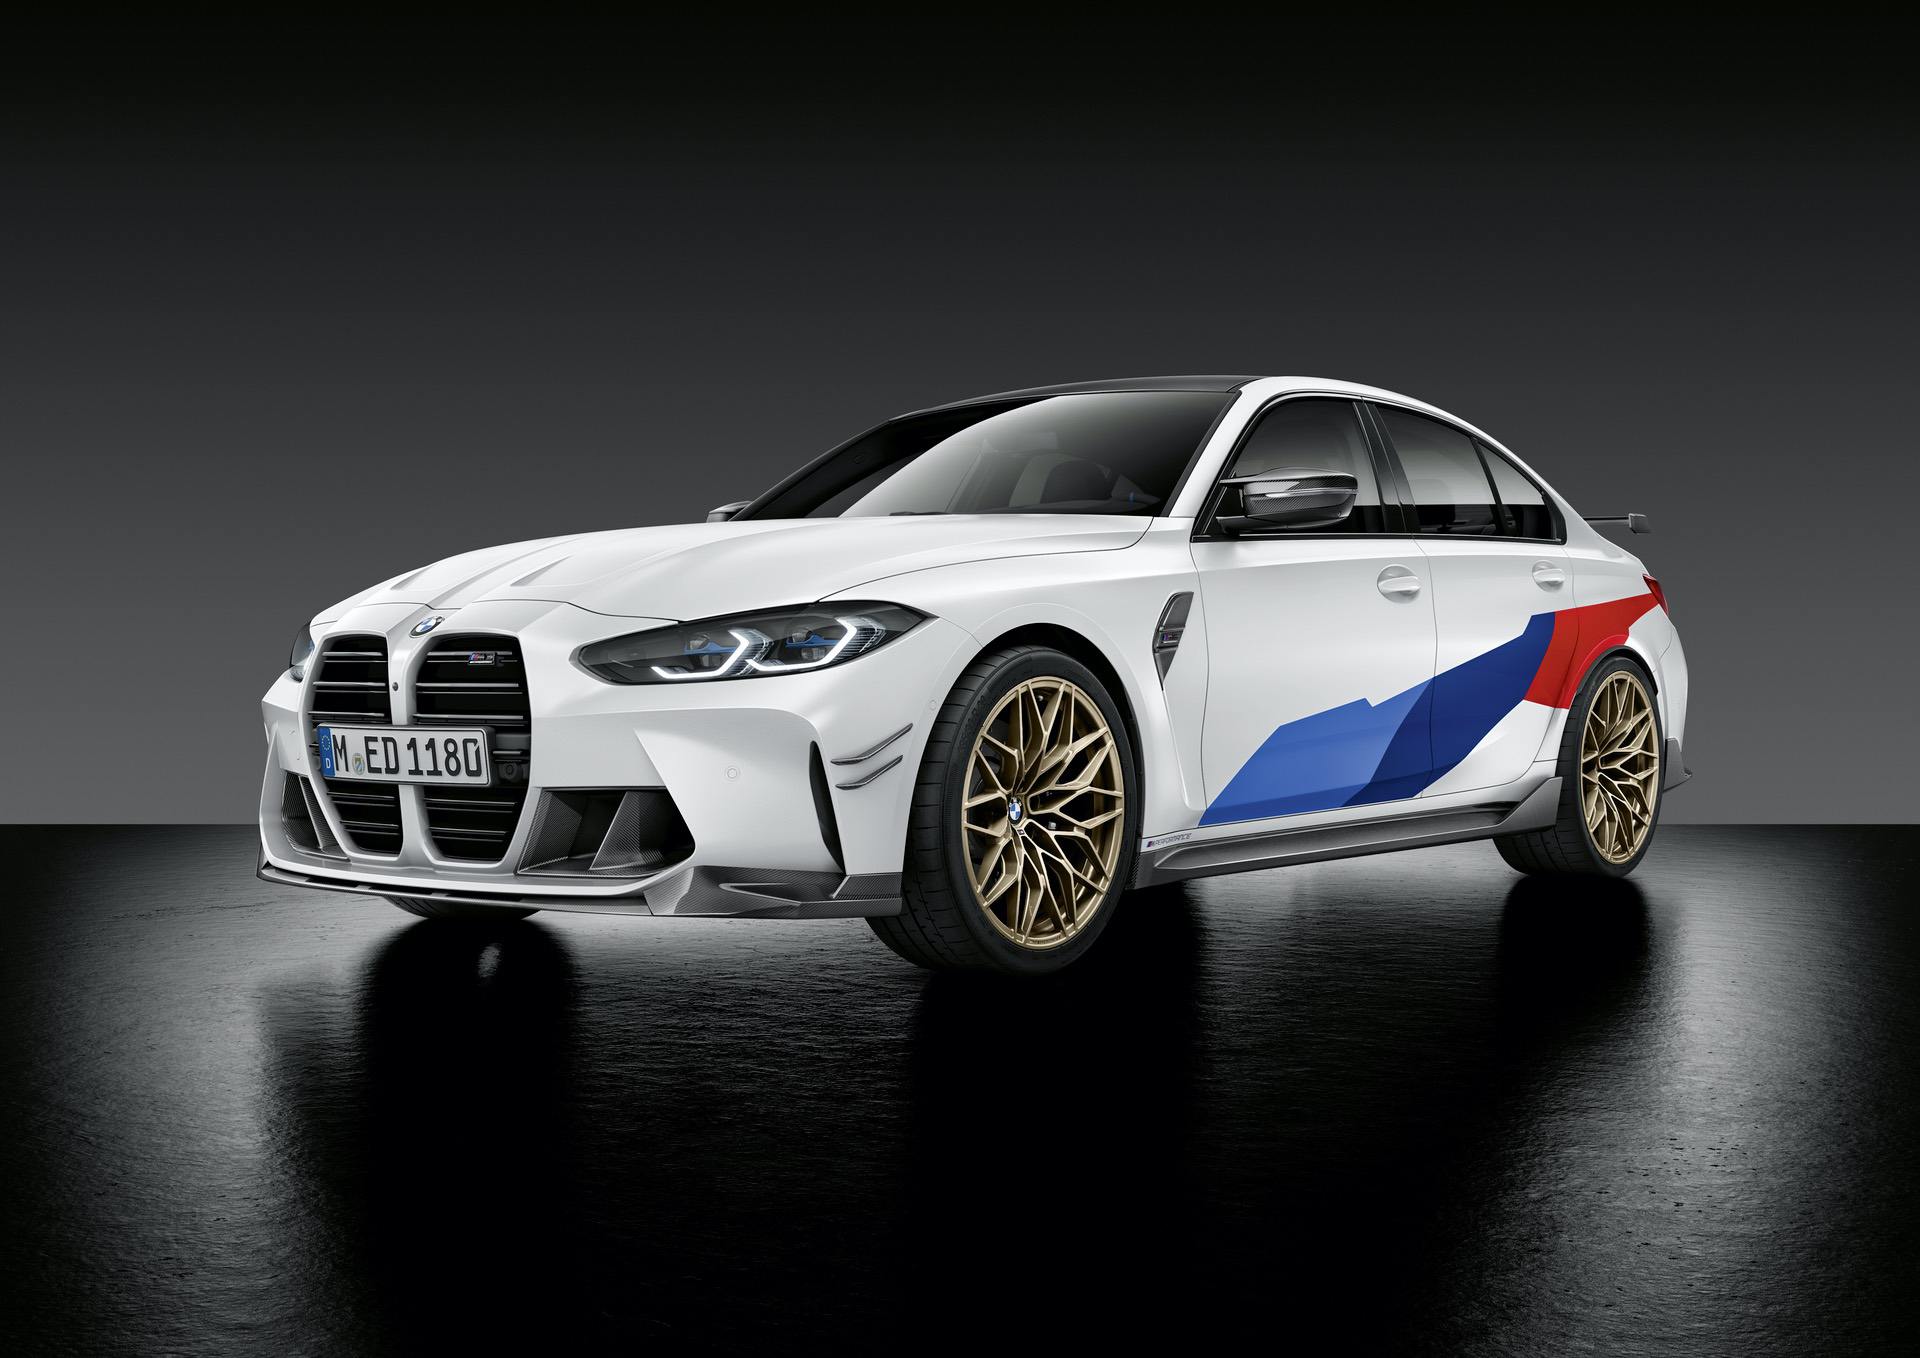 2021 BMW M3 and M4 with M Performance Parts - View this new photo